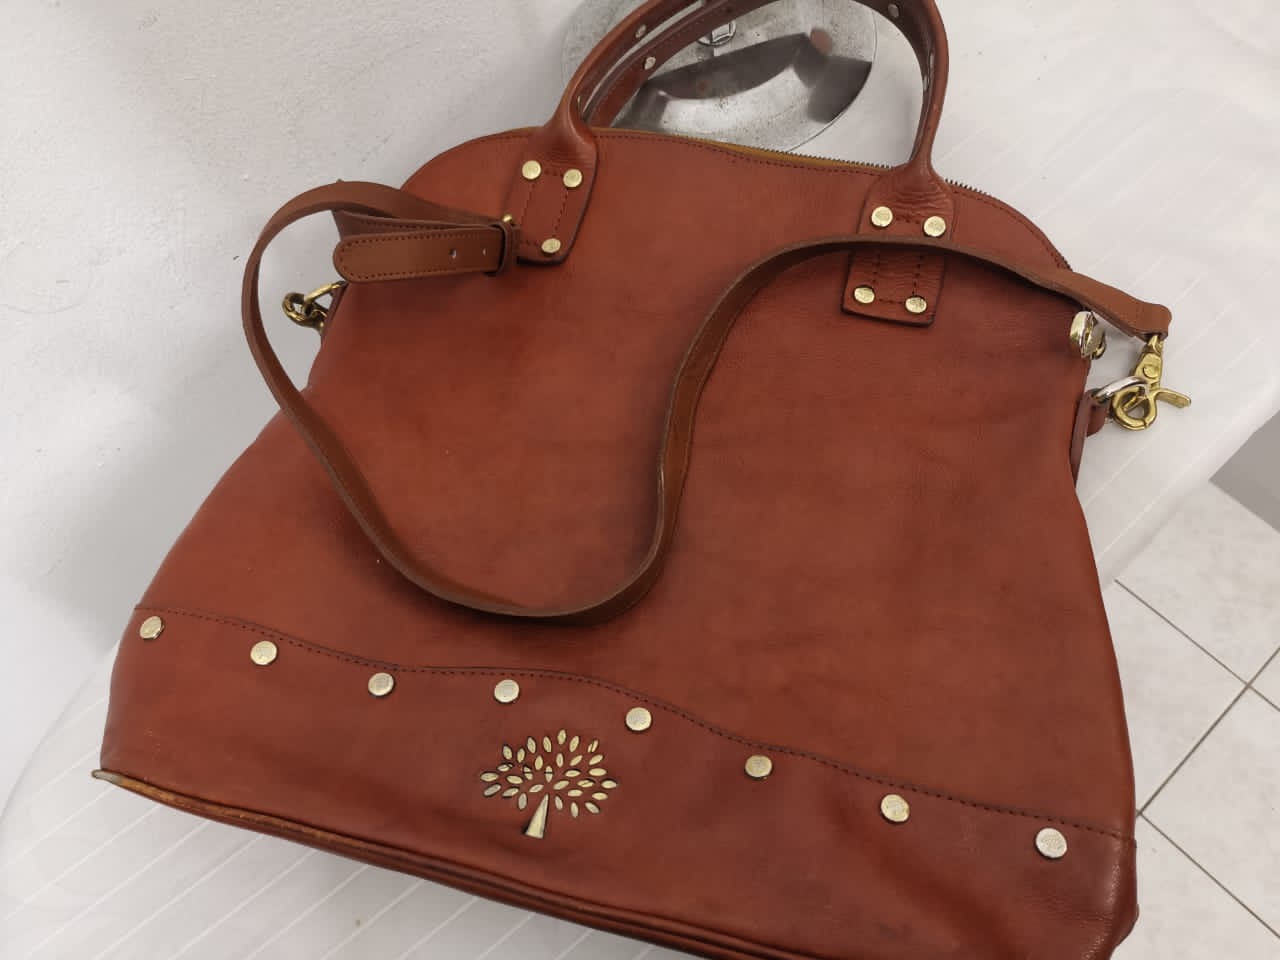 Vintage Mulberry Leather Handle Bag - 17